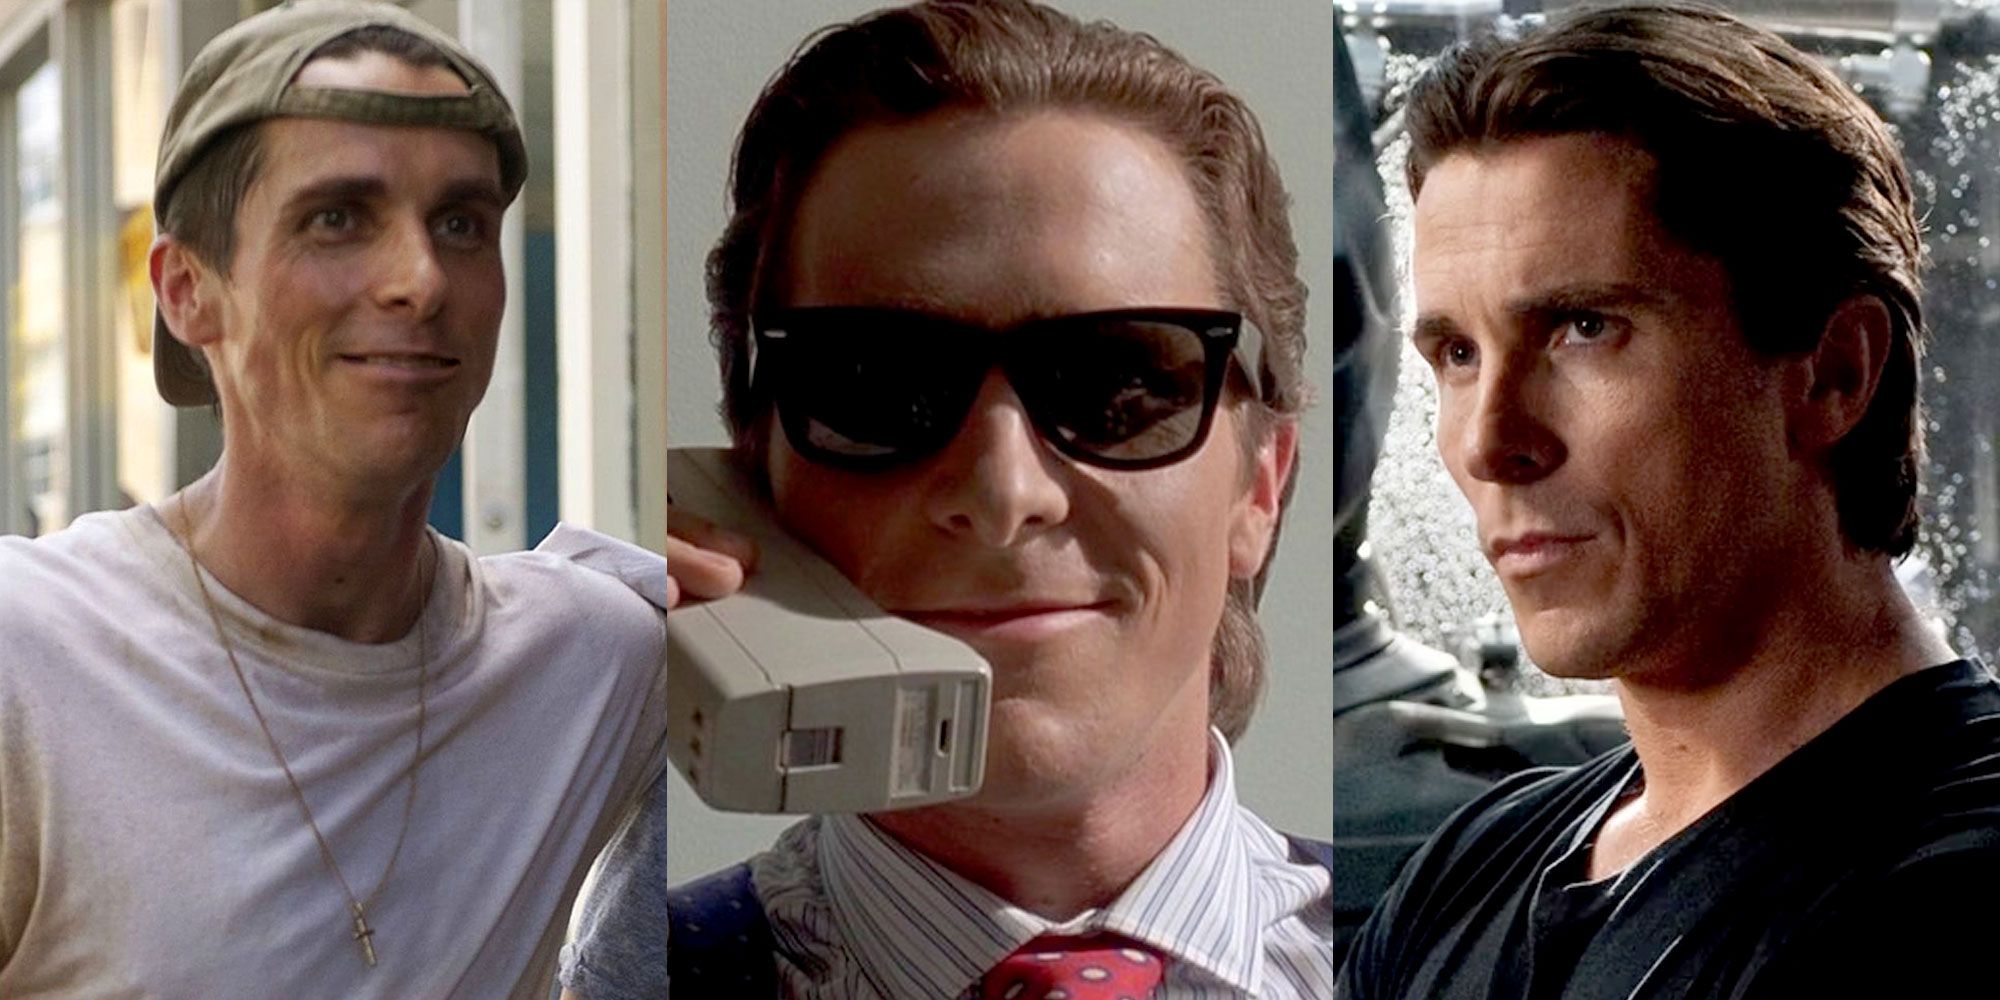 A split image features Christian Bale as characters in The Fighter, American Psycho, and Batman Begins